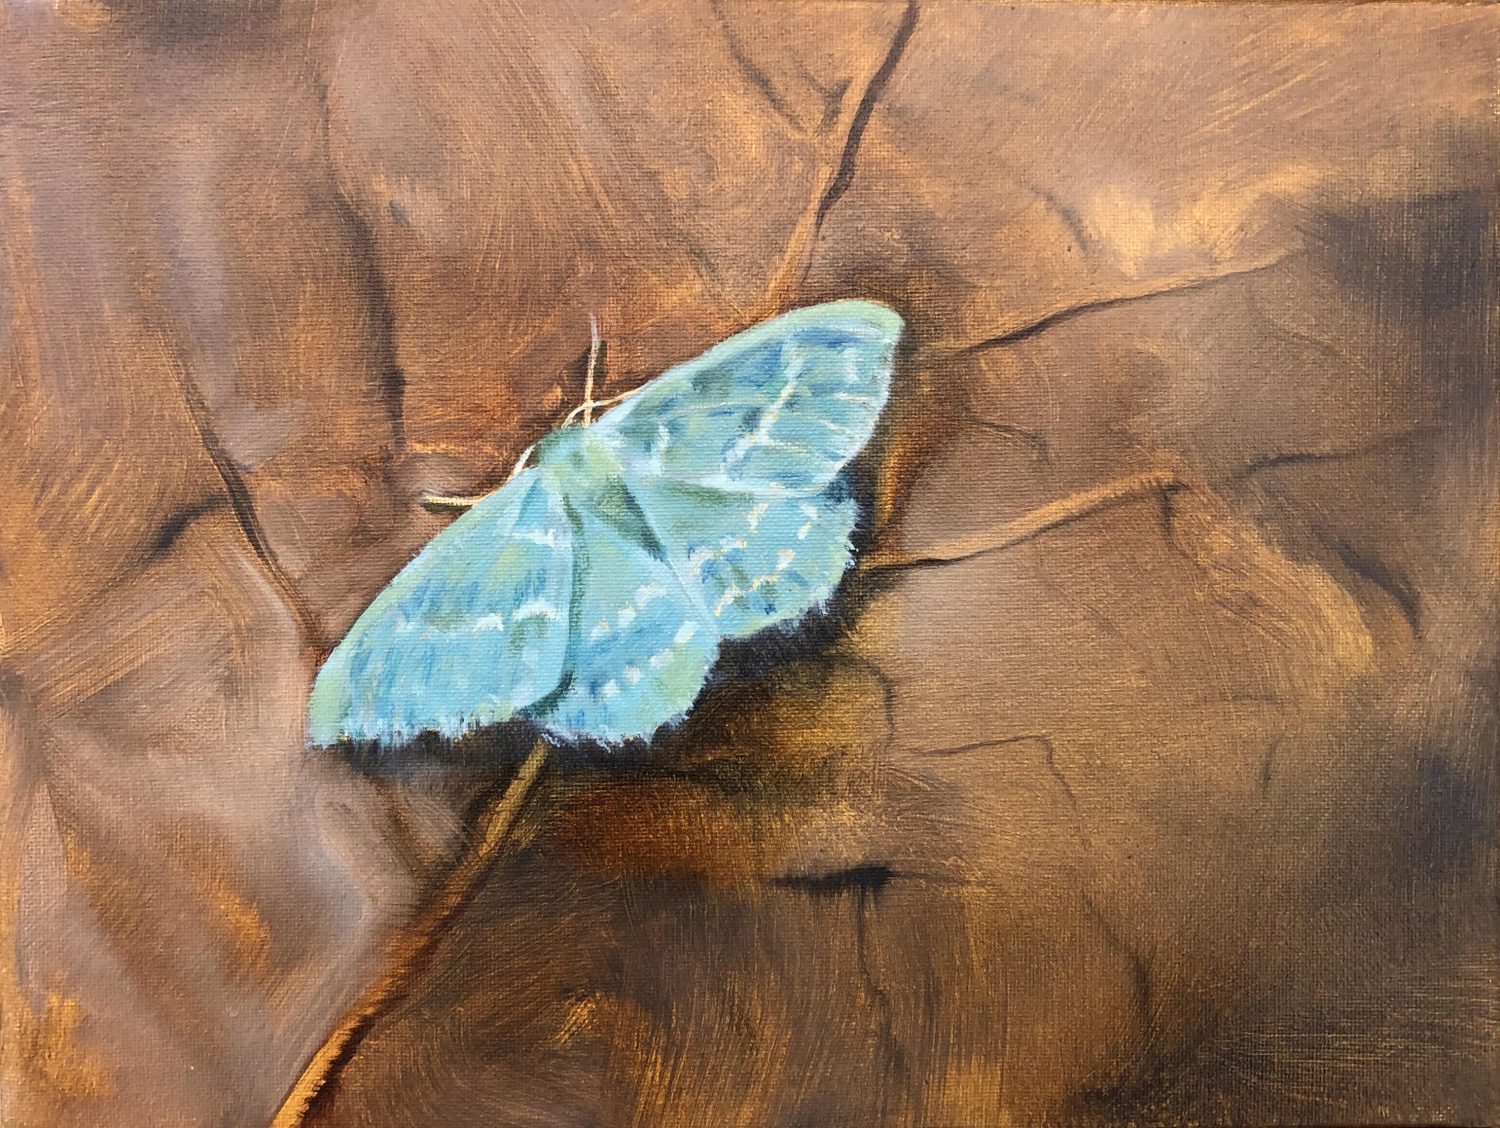 Large Emerald by Beatrice O'Connell